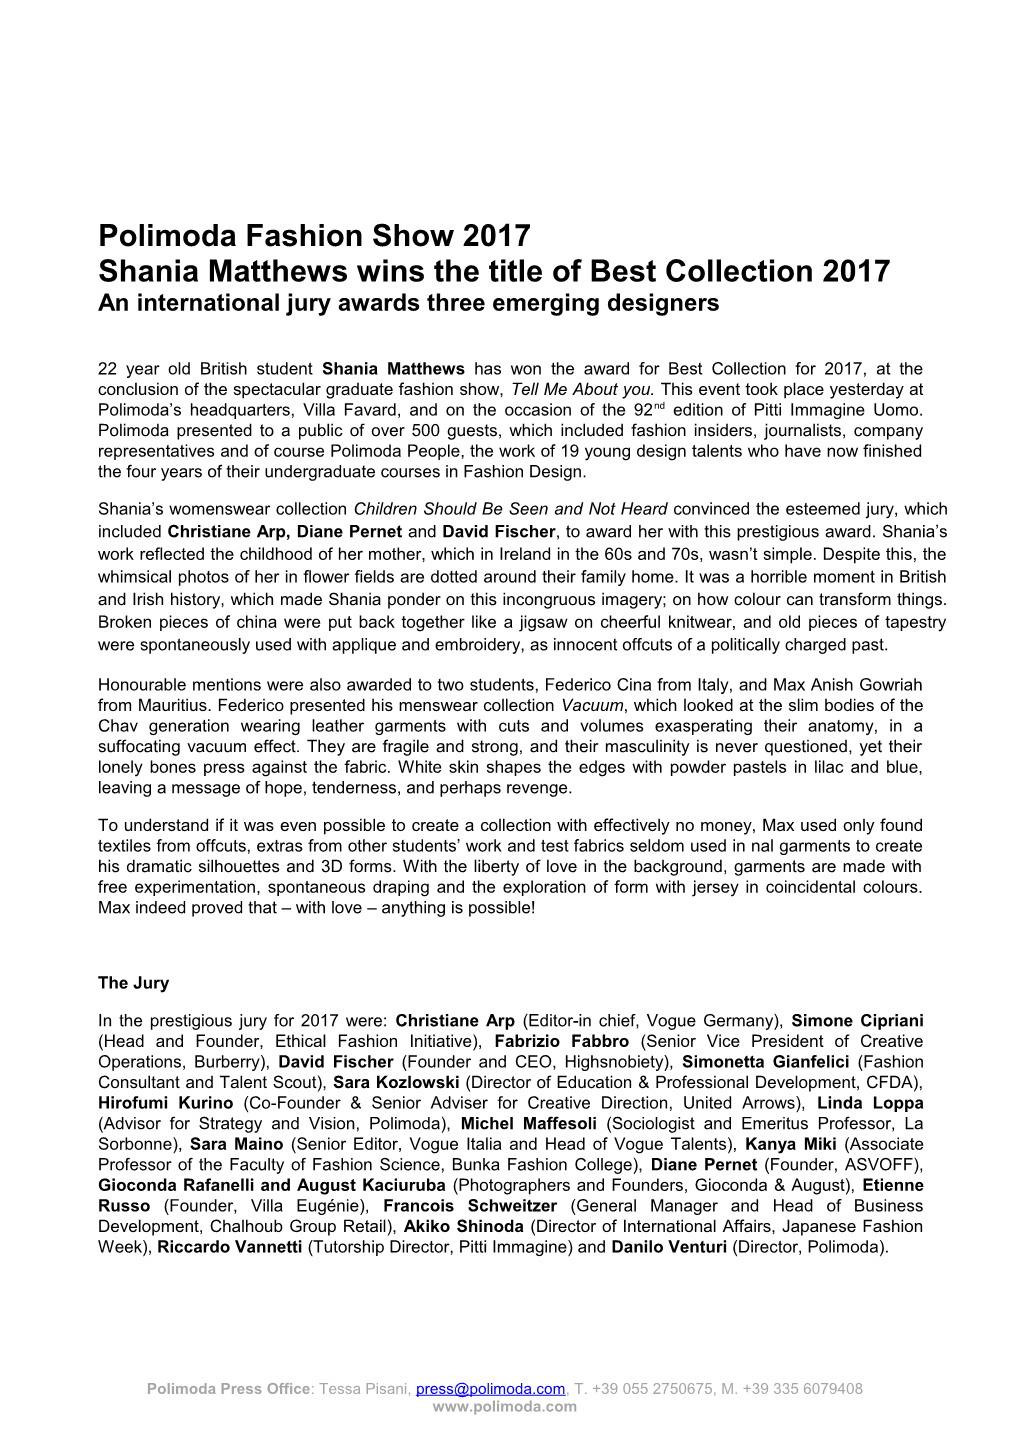 Polimoda Fashion Show 2017 Shania Matthews Wins the Title of Best Collection 2017 An